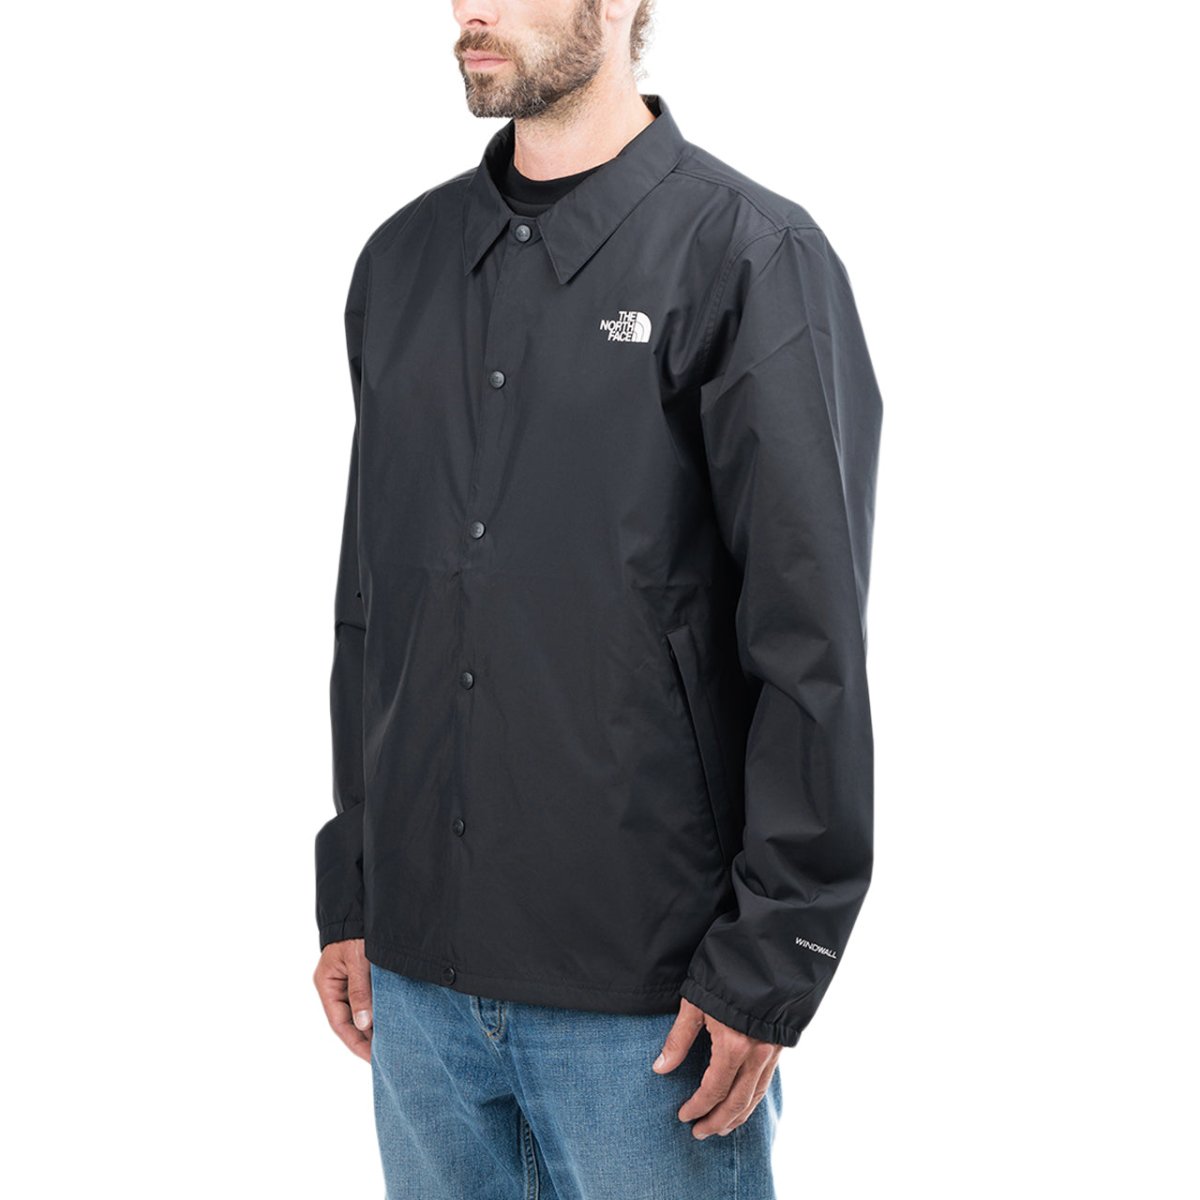 The North Face International Collection Coach Jacket (Schwarz)  - Allike Store